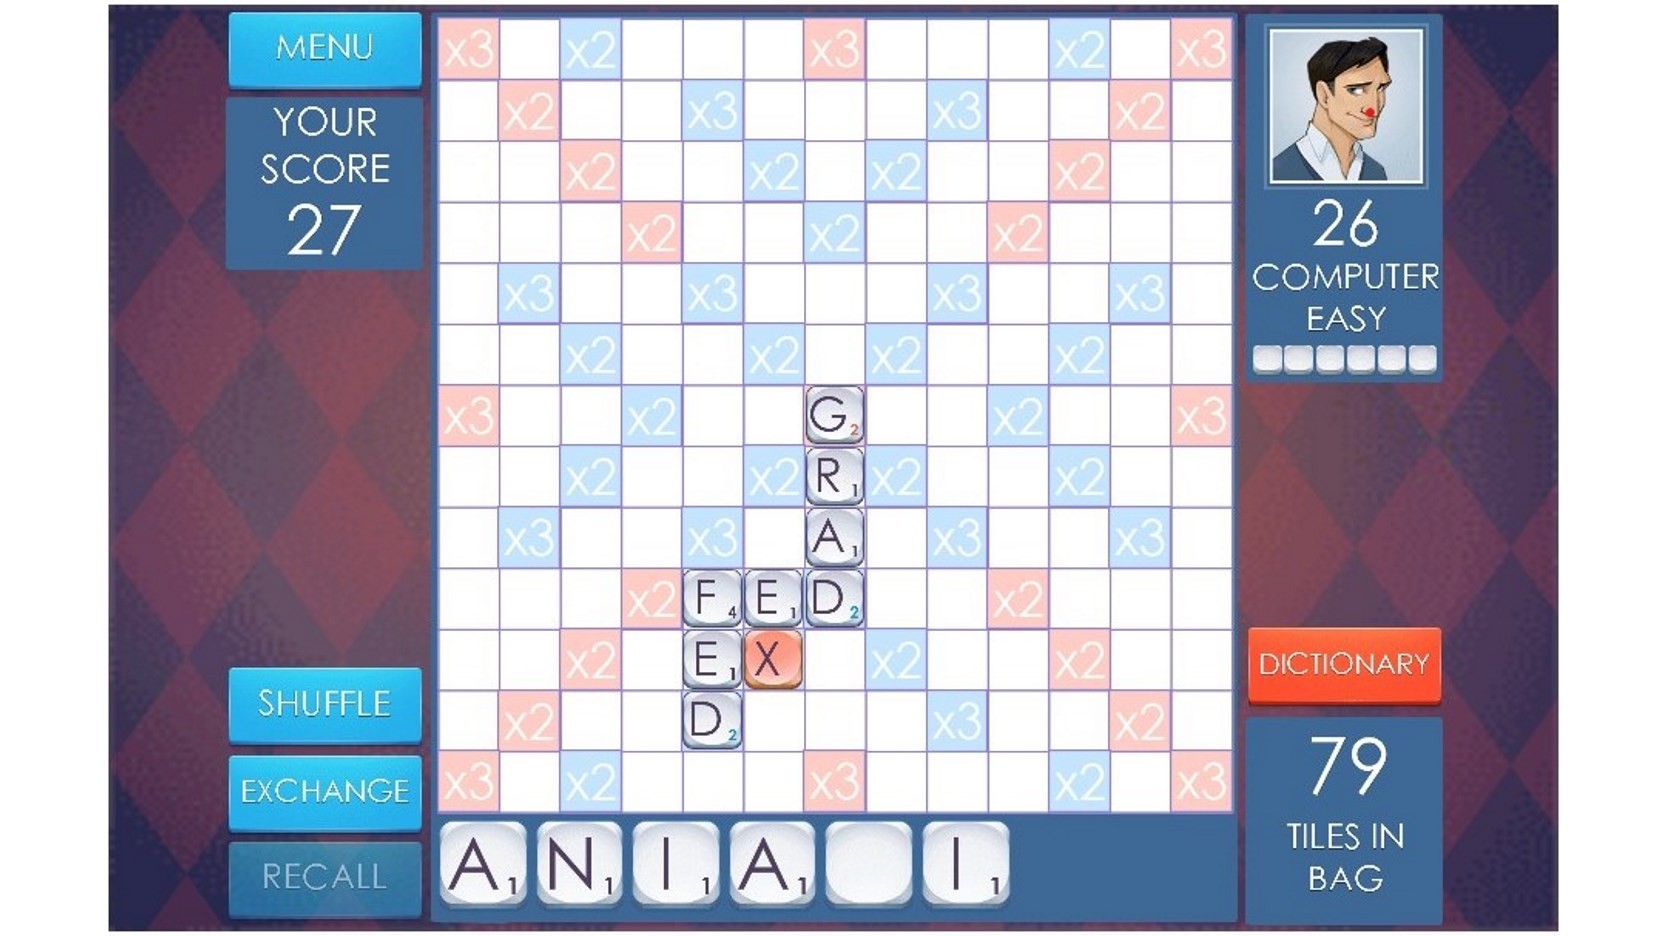 11 Epic Scrabble Games to Play Online With Friends